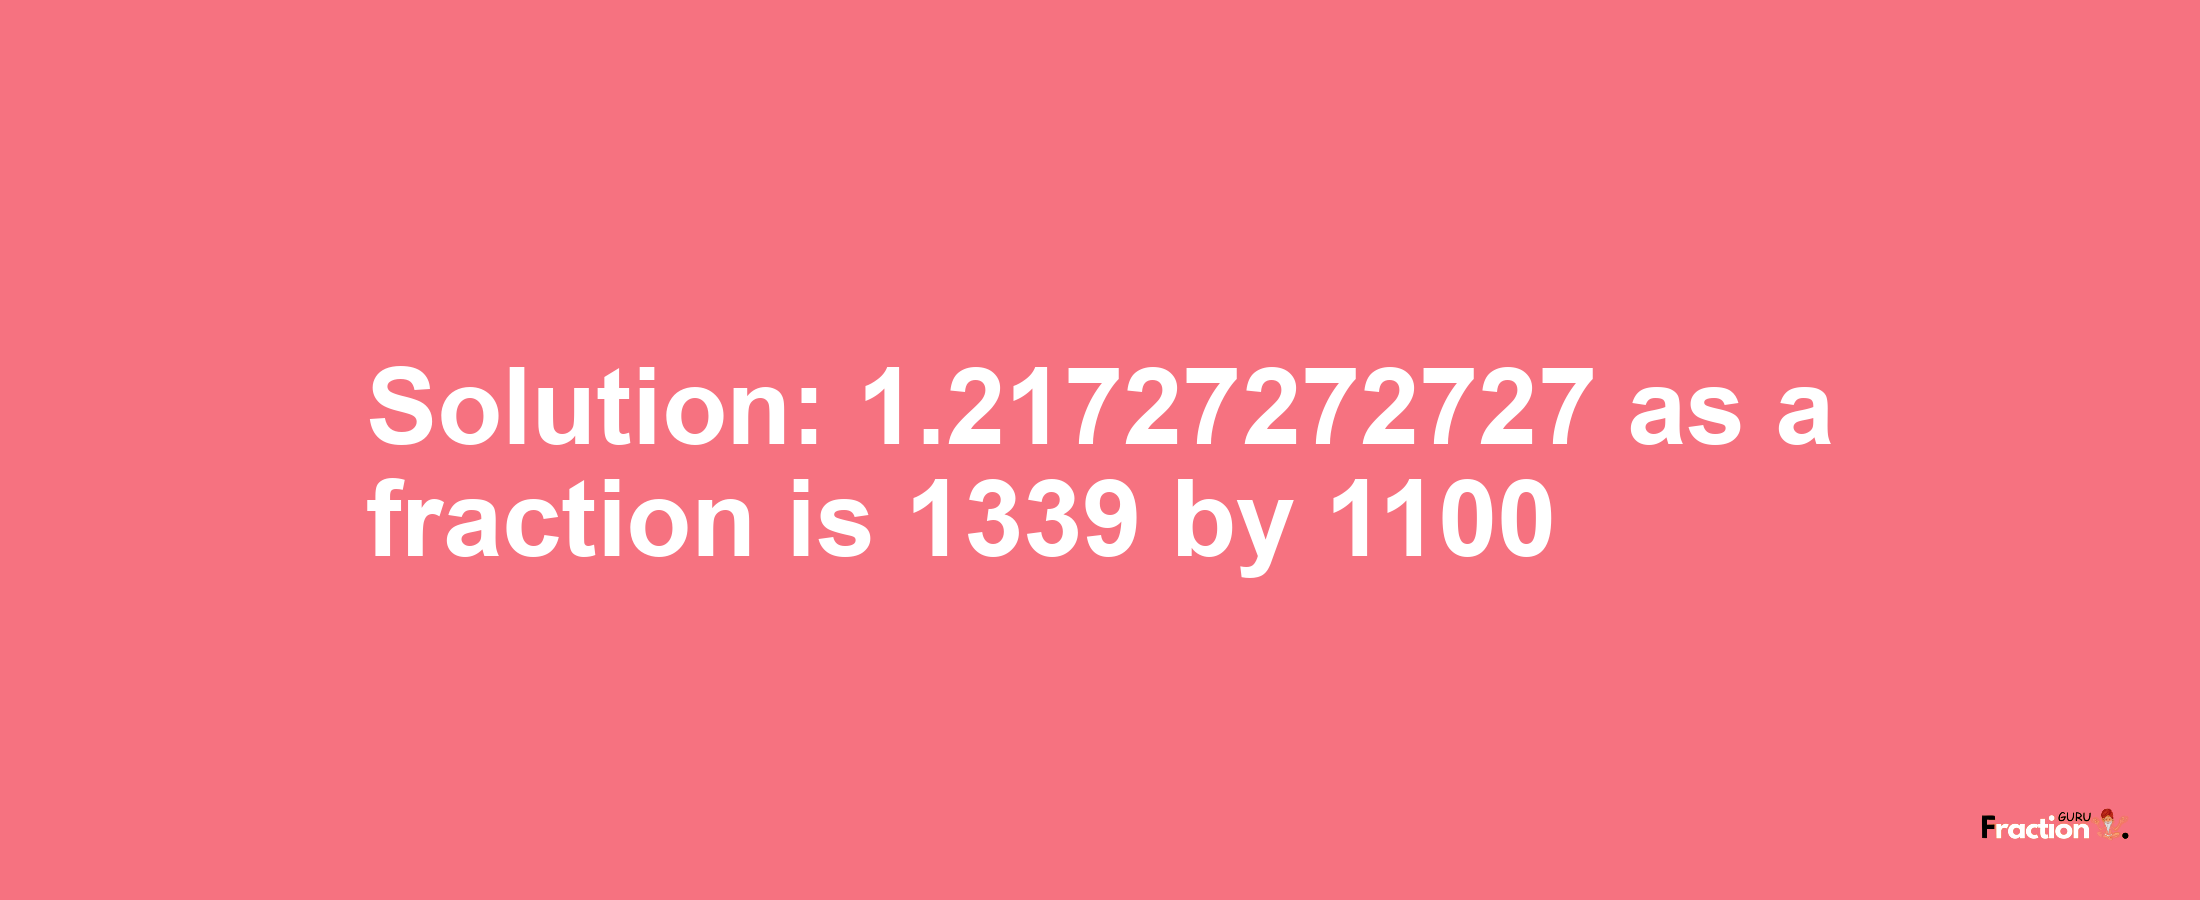 Solution:1.21727272727 as a fraction is 1339/1100